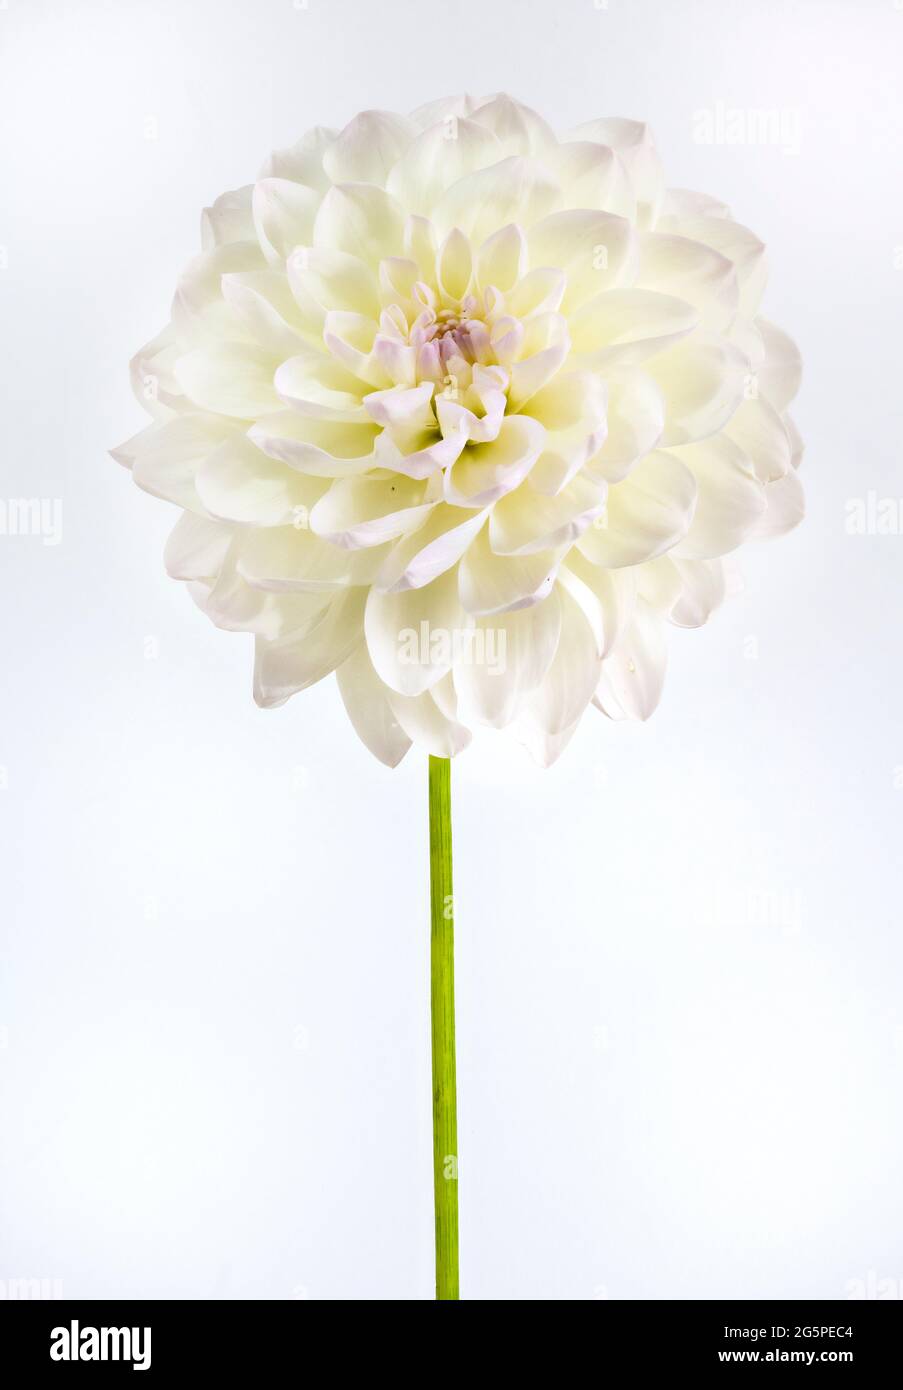 Close up of a white Pom Pom Dahlia flower. A member of the Compositae (also called Asteraceae) family, they originate from Mexico and South America. Stock Photo